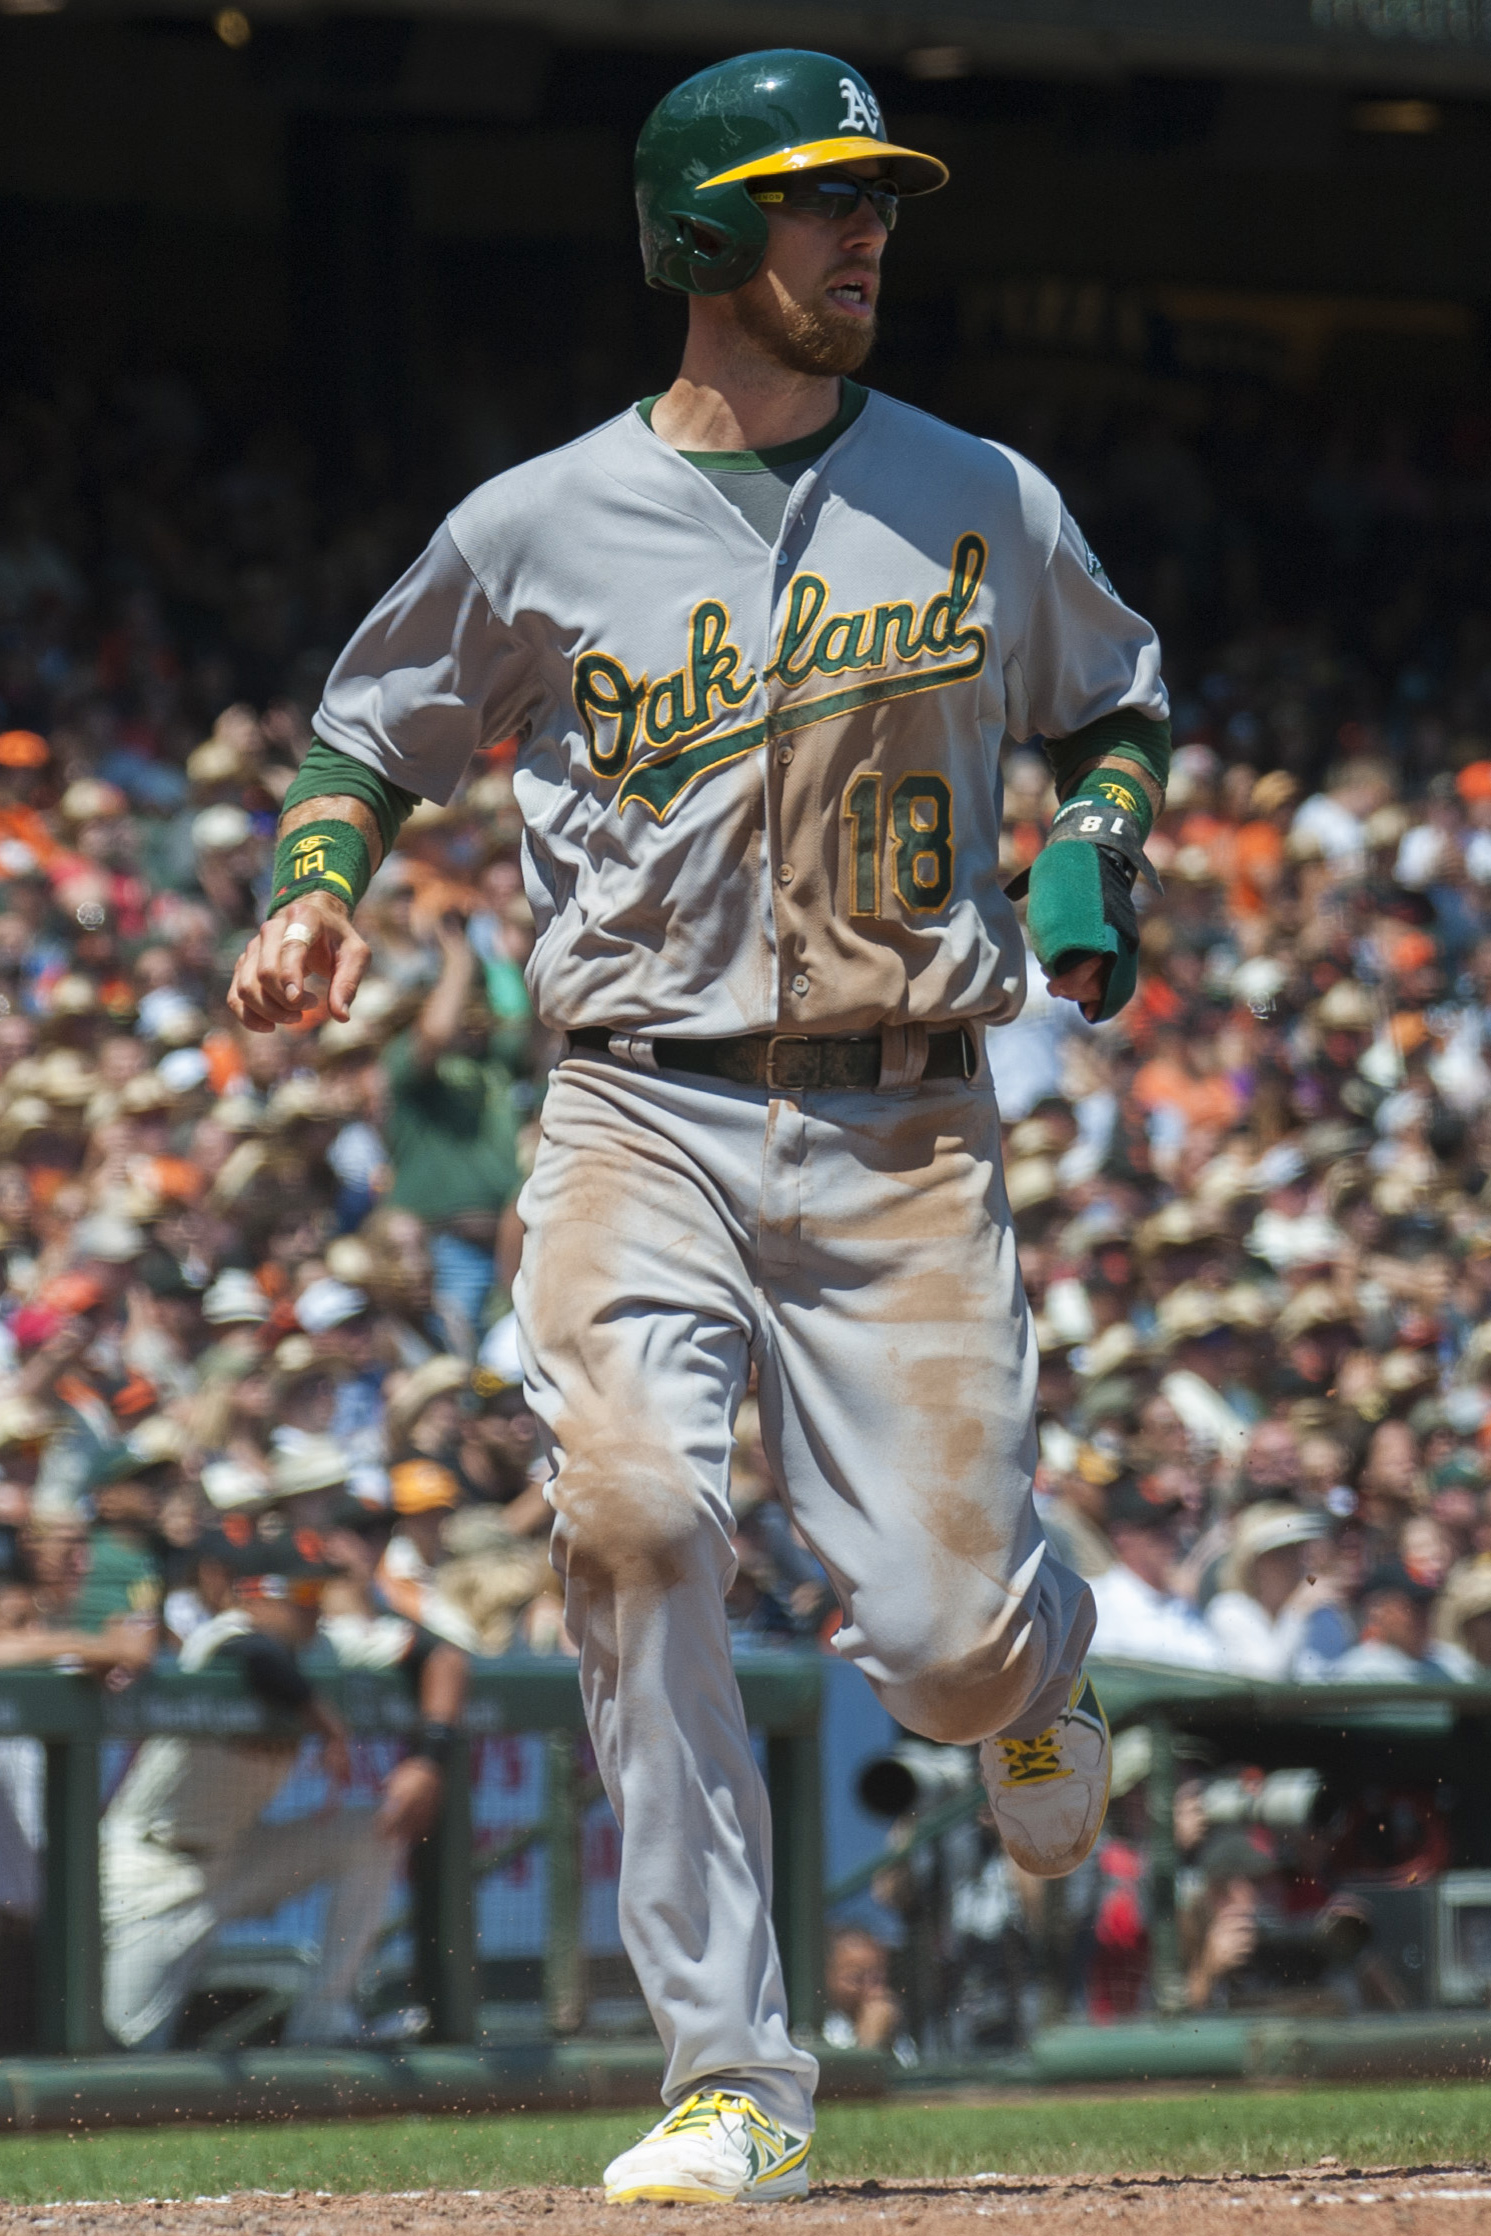 The A's should look to bring Ben Zobrist back.